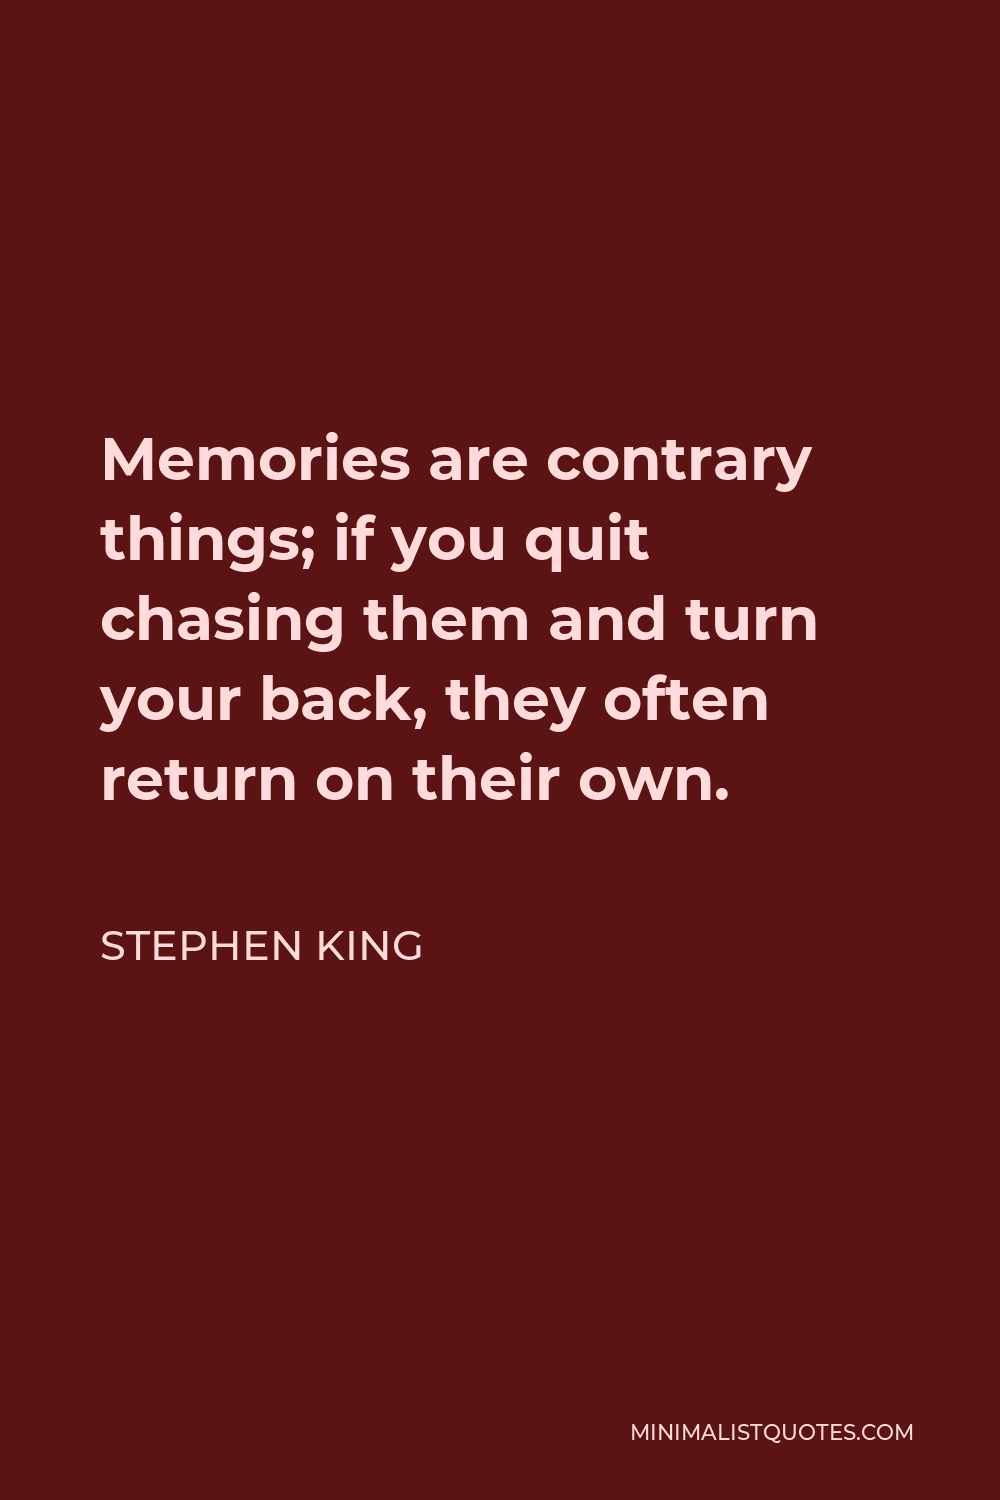 Stephen King Quote - Memories are contrary things; if you quit chasing them and turn your back, they often return on their own.